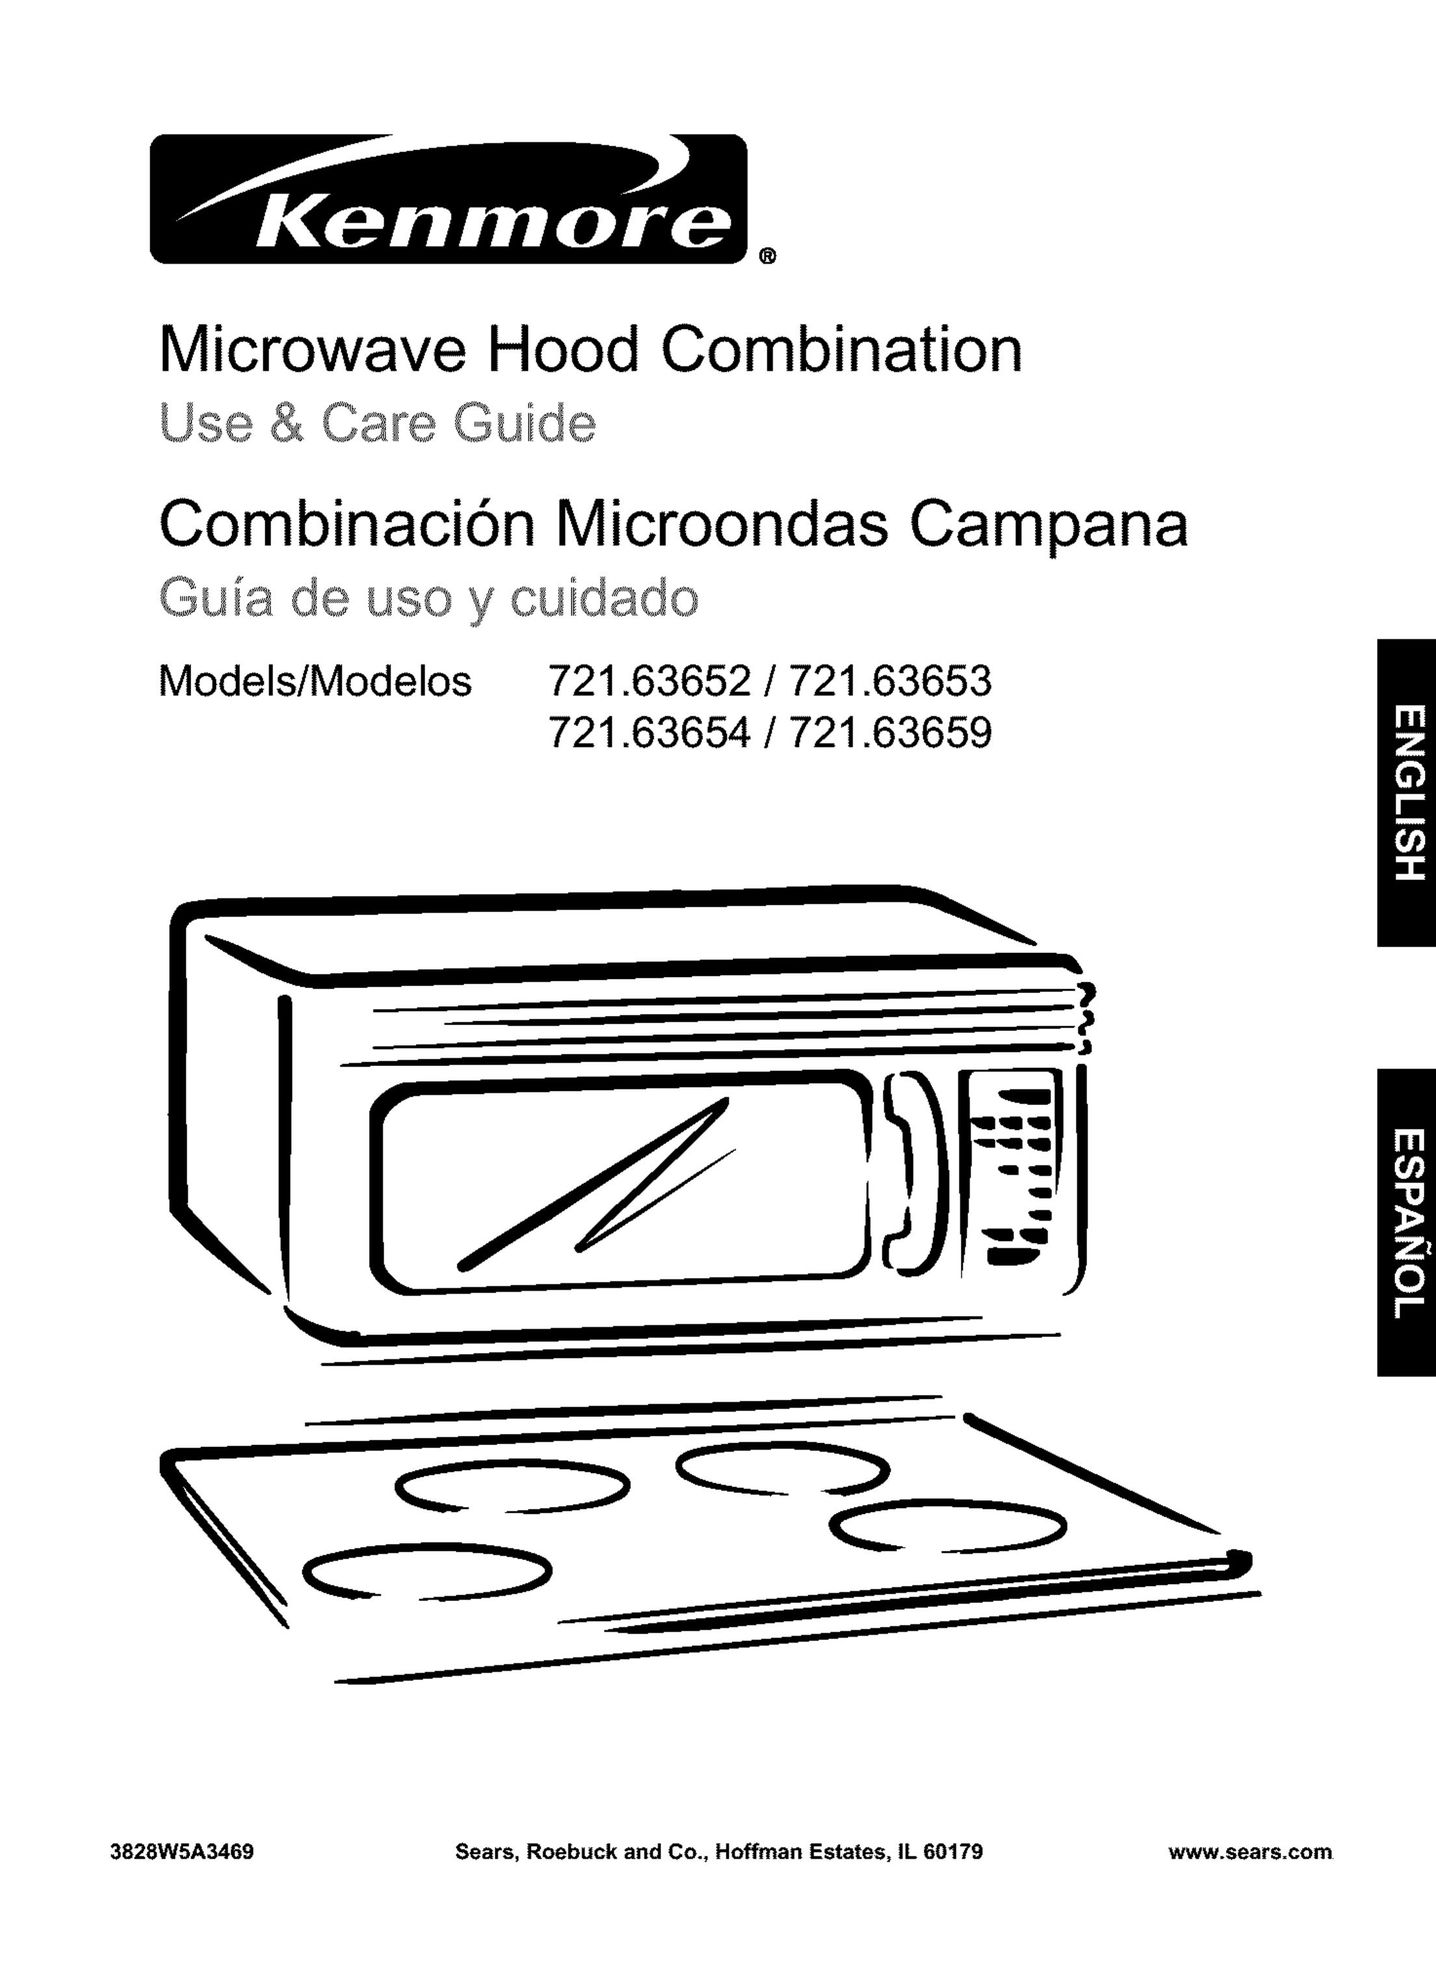 Kenmore 721.63654 Microwave Oven User Manual